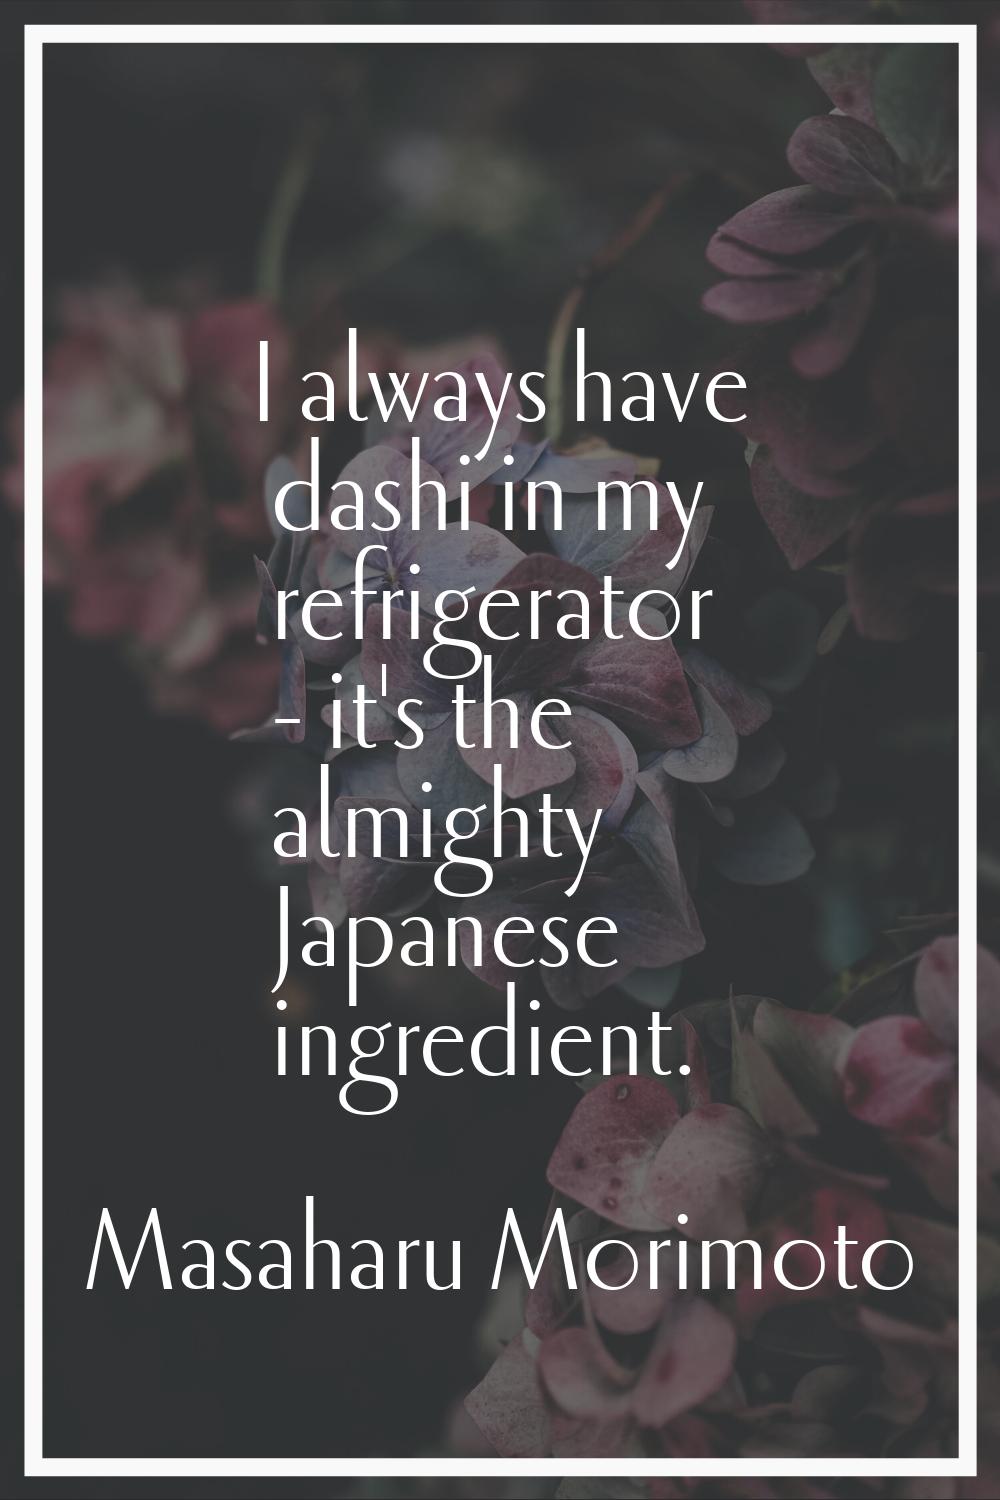 I always have dashi in my refrigerator - it's the almighty Japanese ingredient.